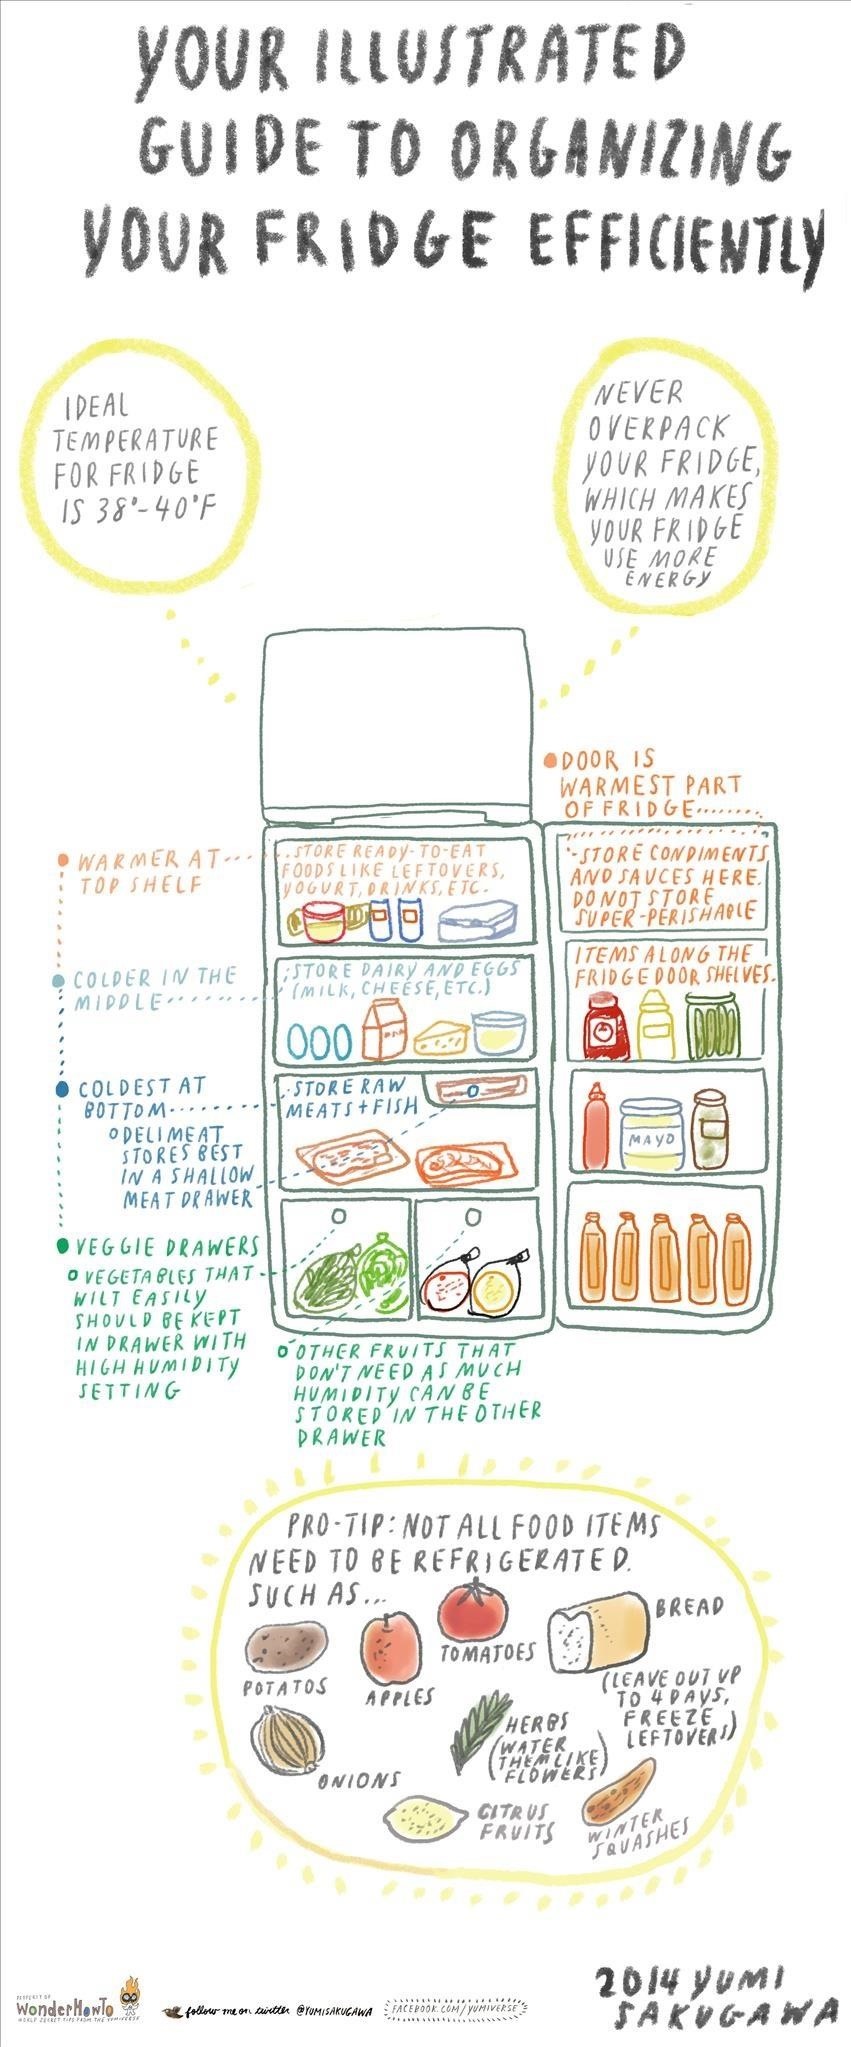 How to Organize Your Fridge More Efficiently for Longer Lasting Foods